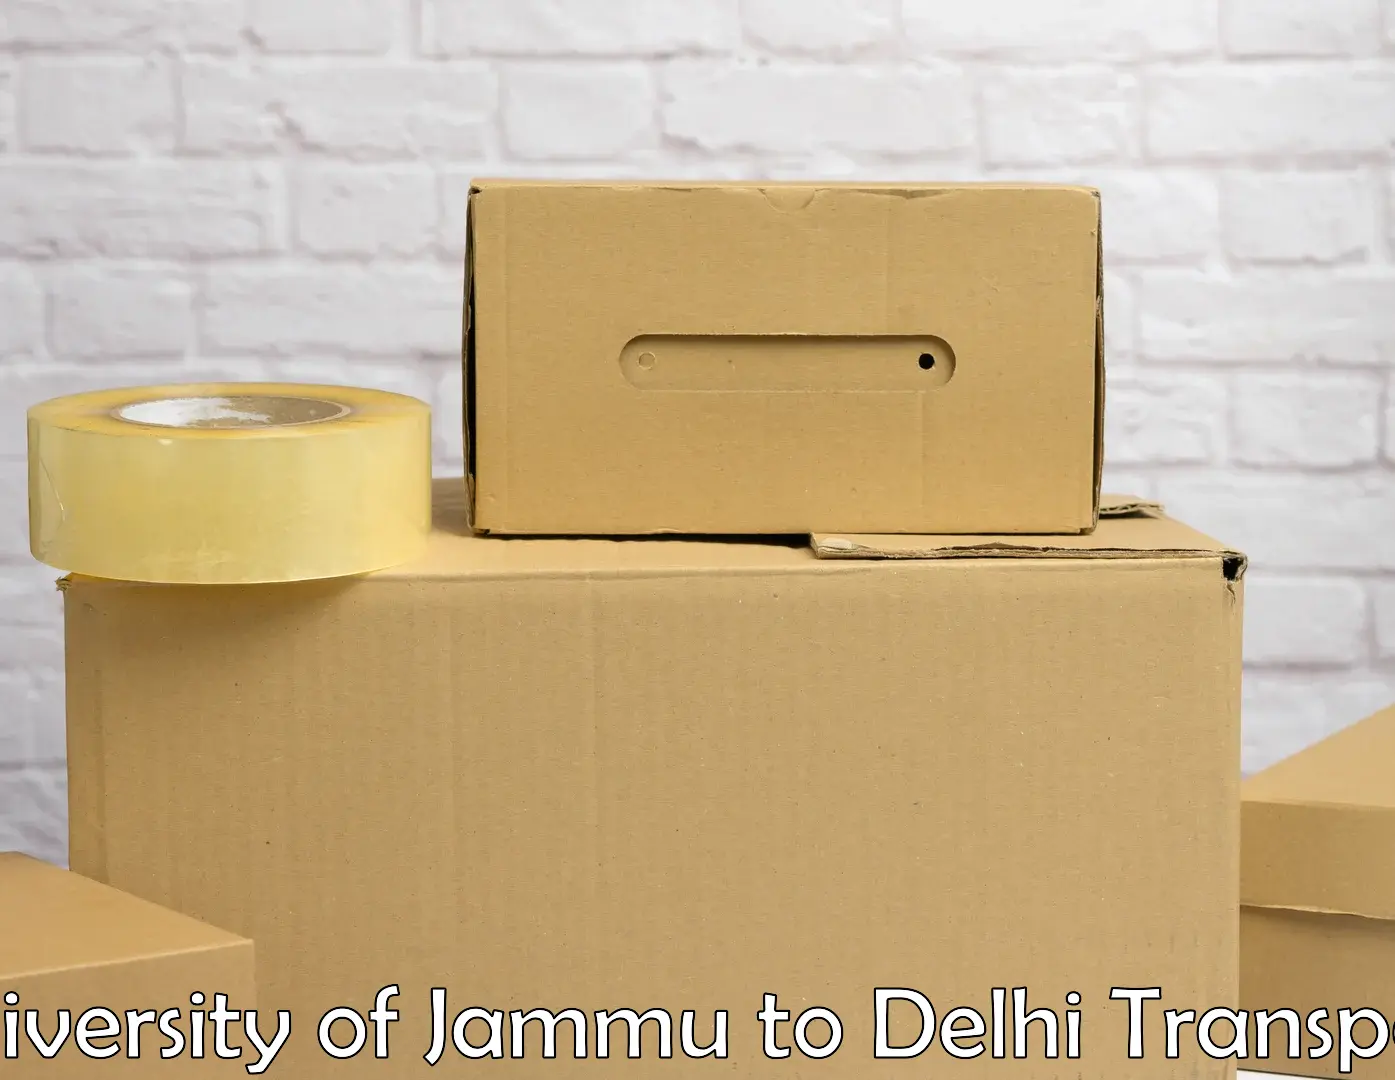 Container transport service University of Jammu to East Delhi